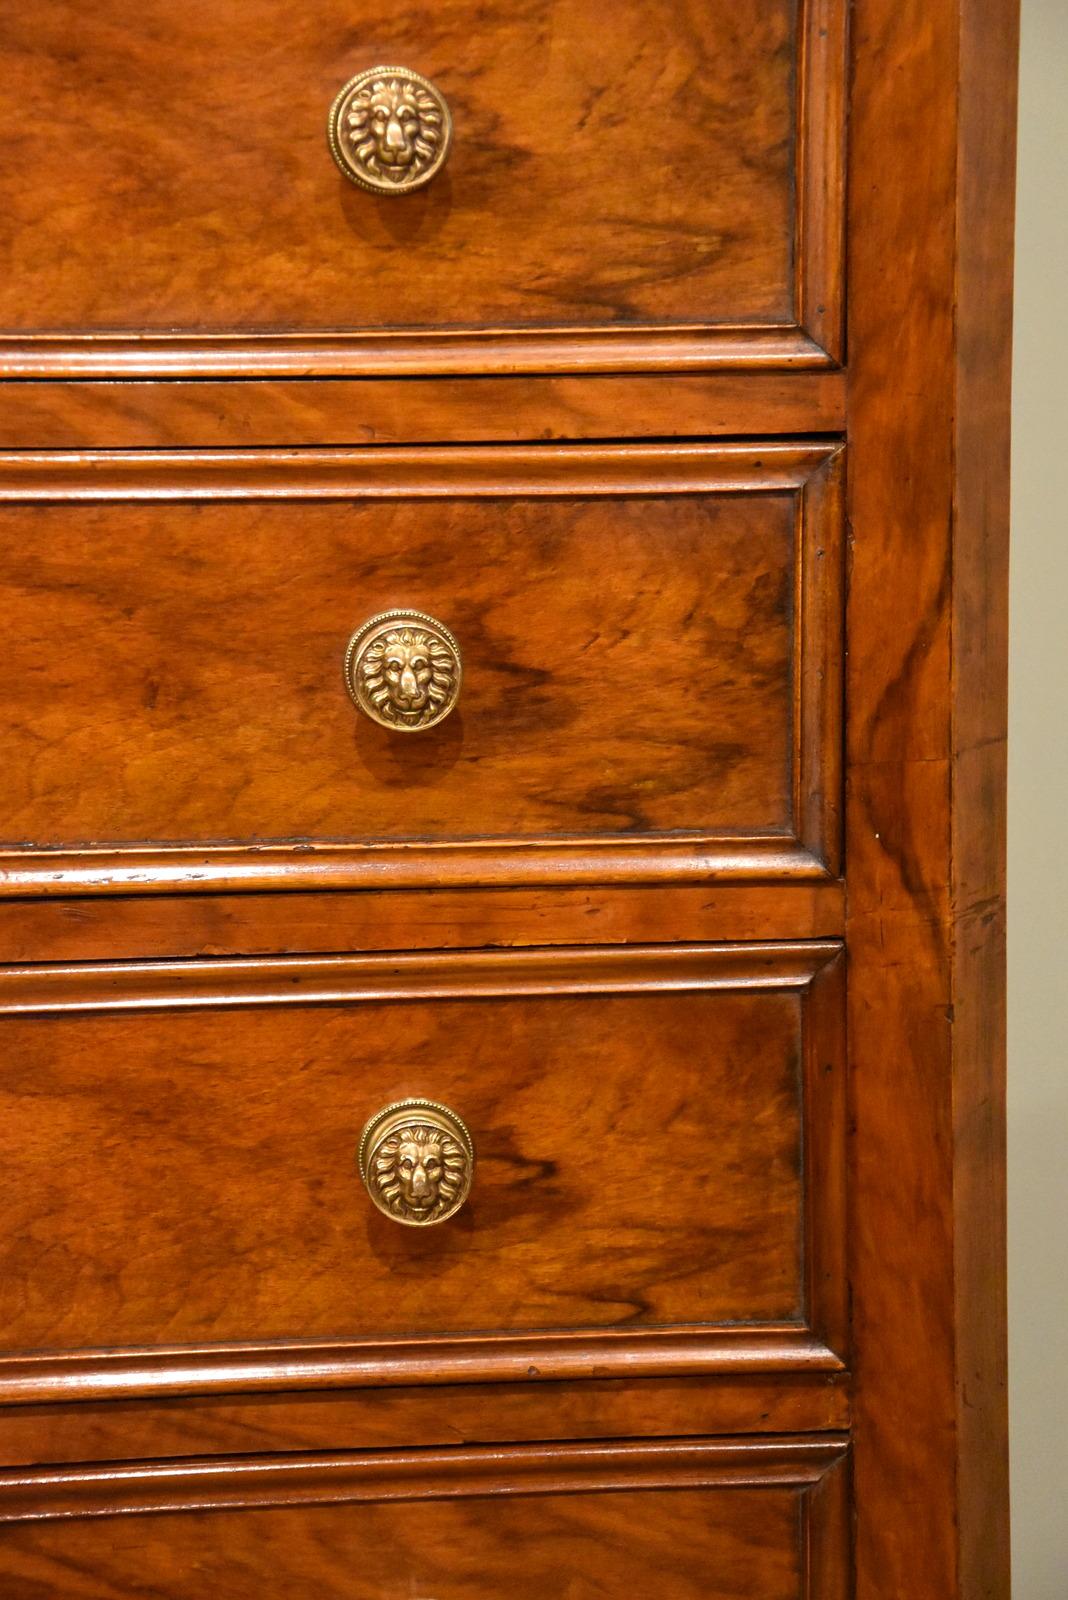 A very handsome Mid-19th century French mahogany and brass-mounted Wellington chest of drawers

Measures: Height 55